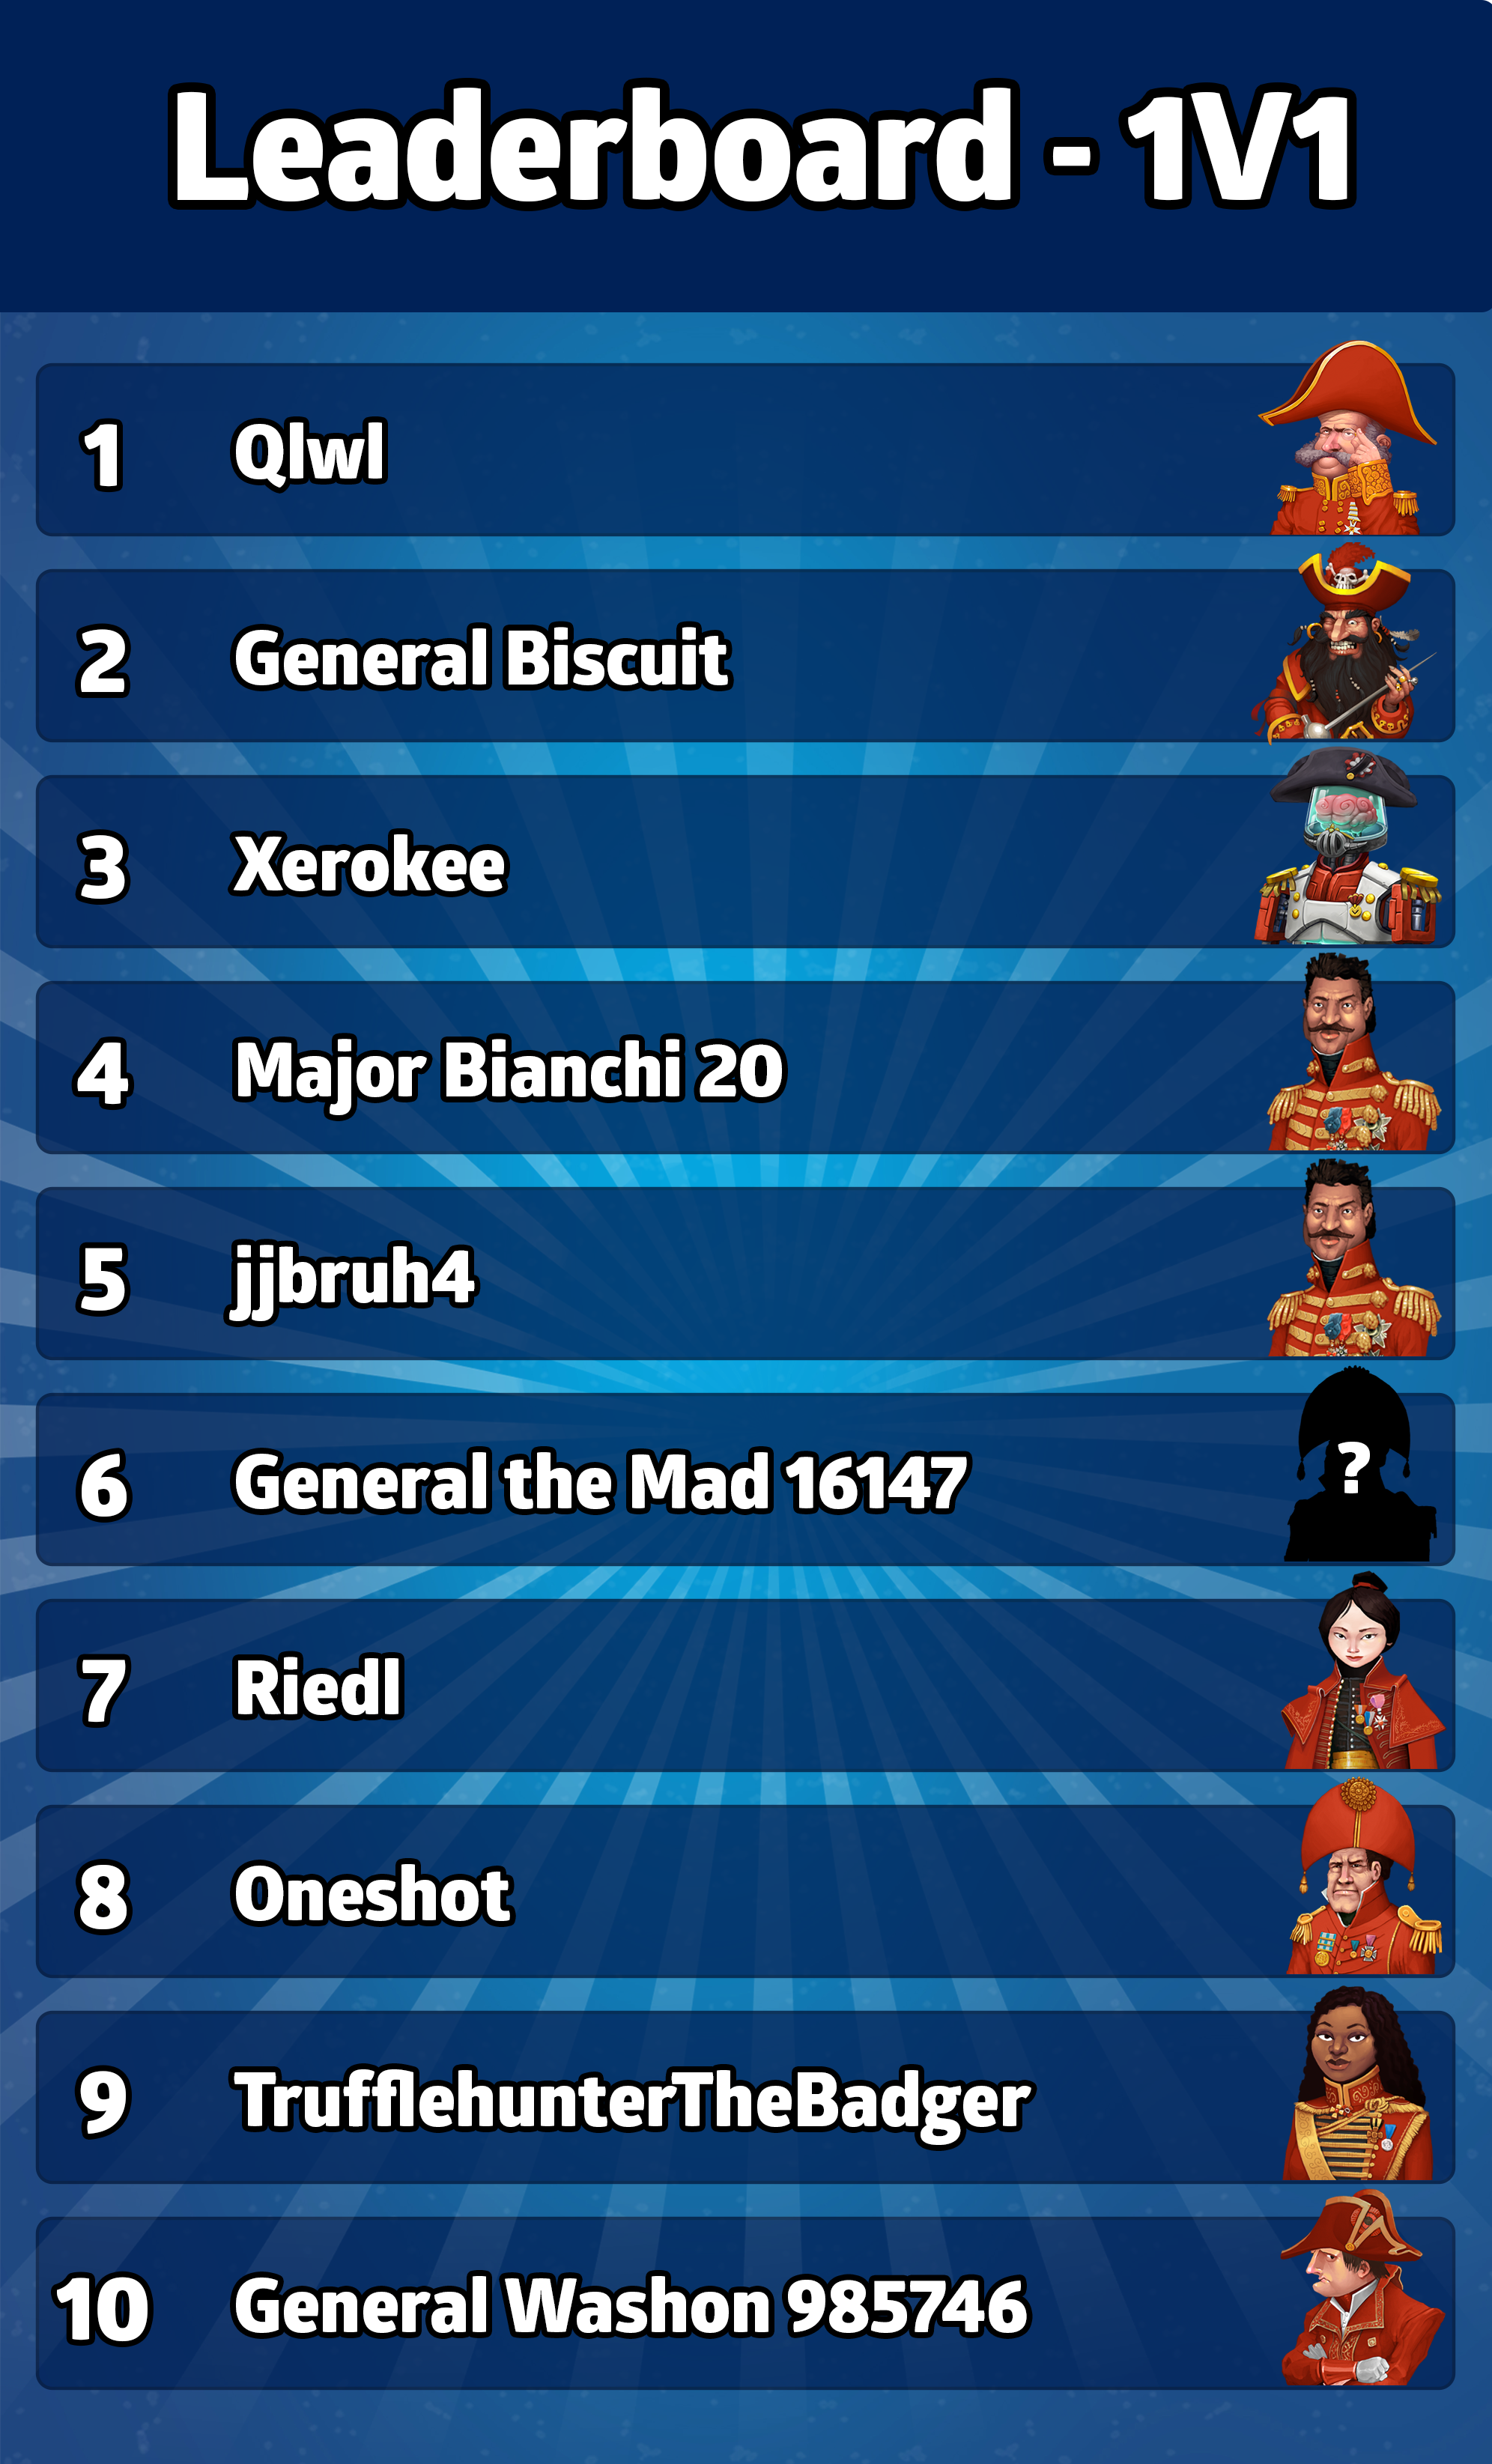 How to check the global leaderboard on Brawl Stars? 